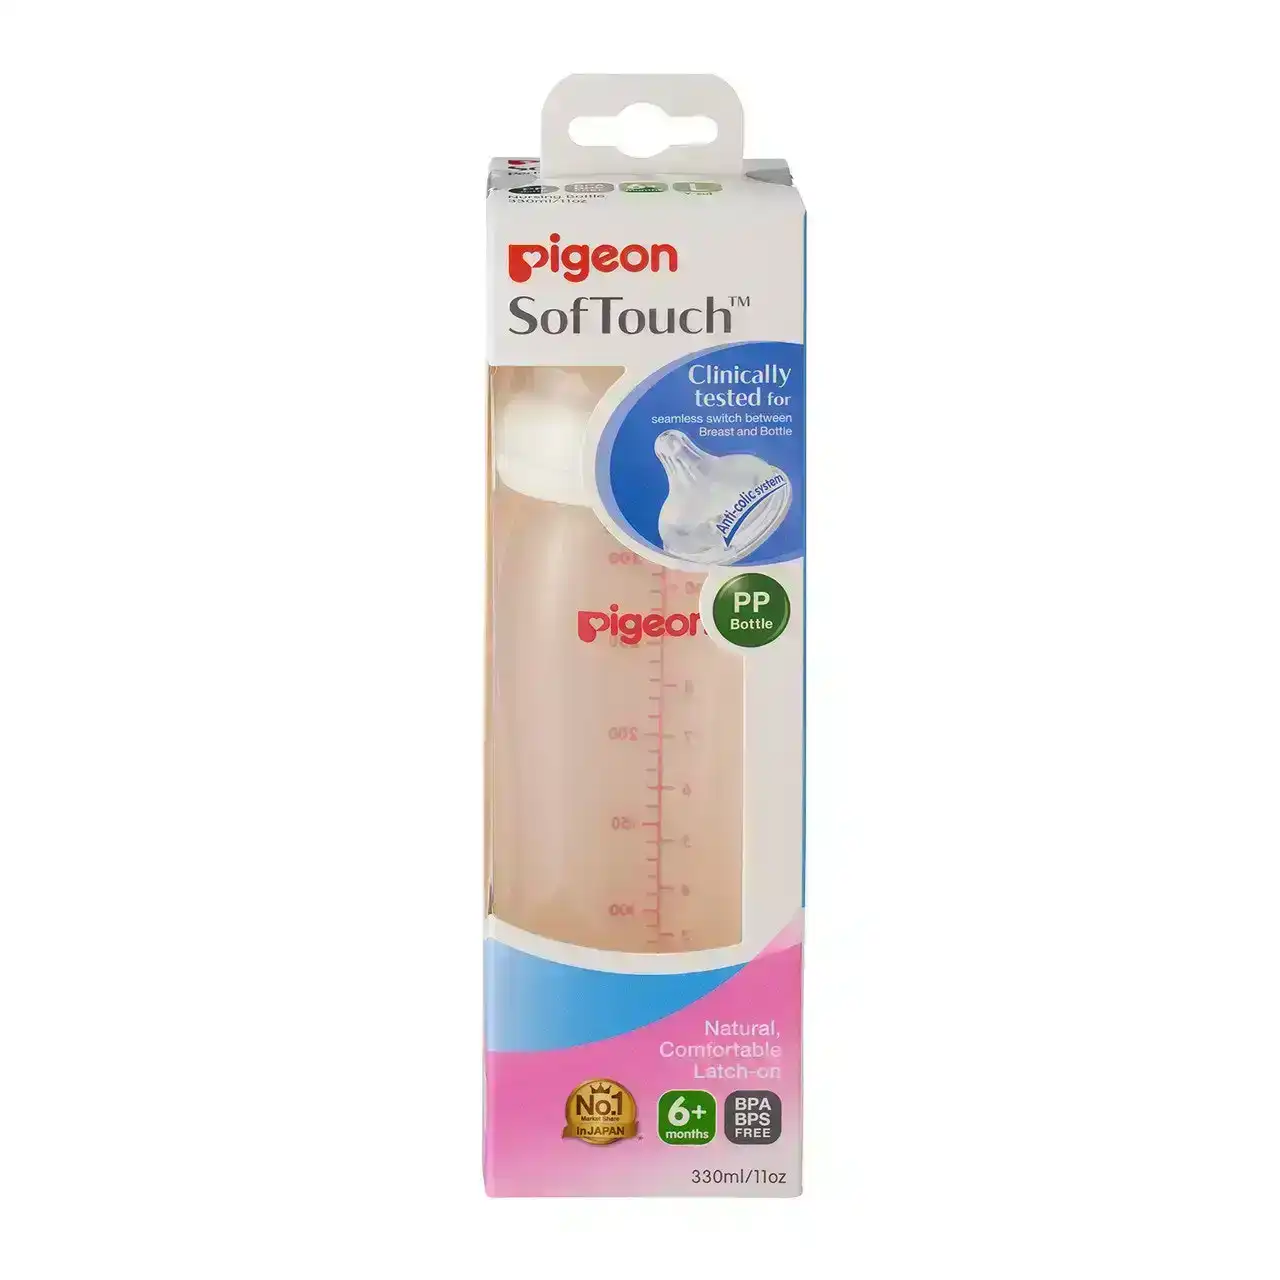 PIGEON Softouch Bottle PP 330ml